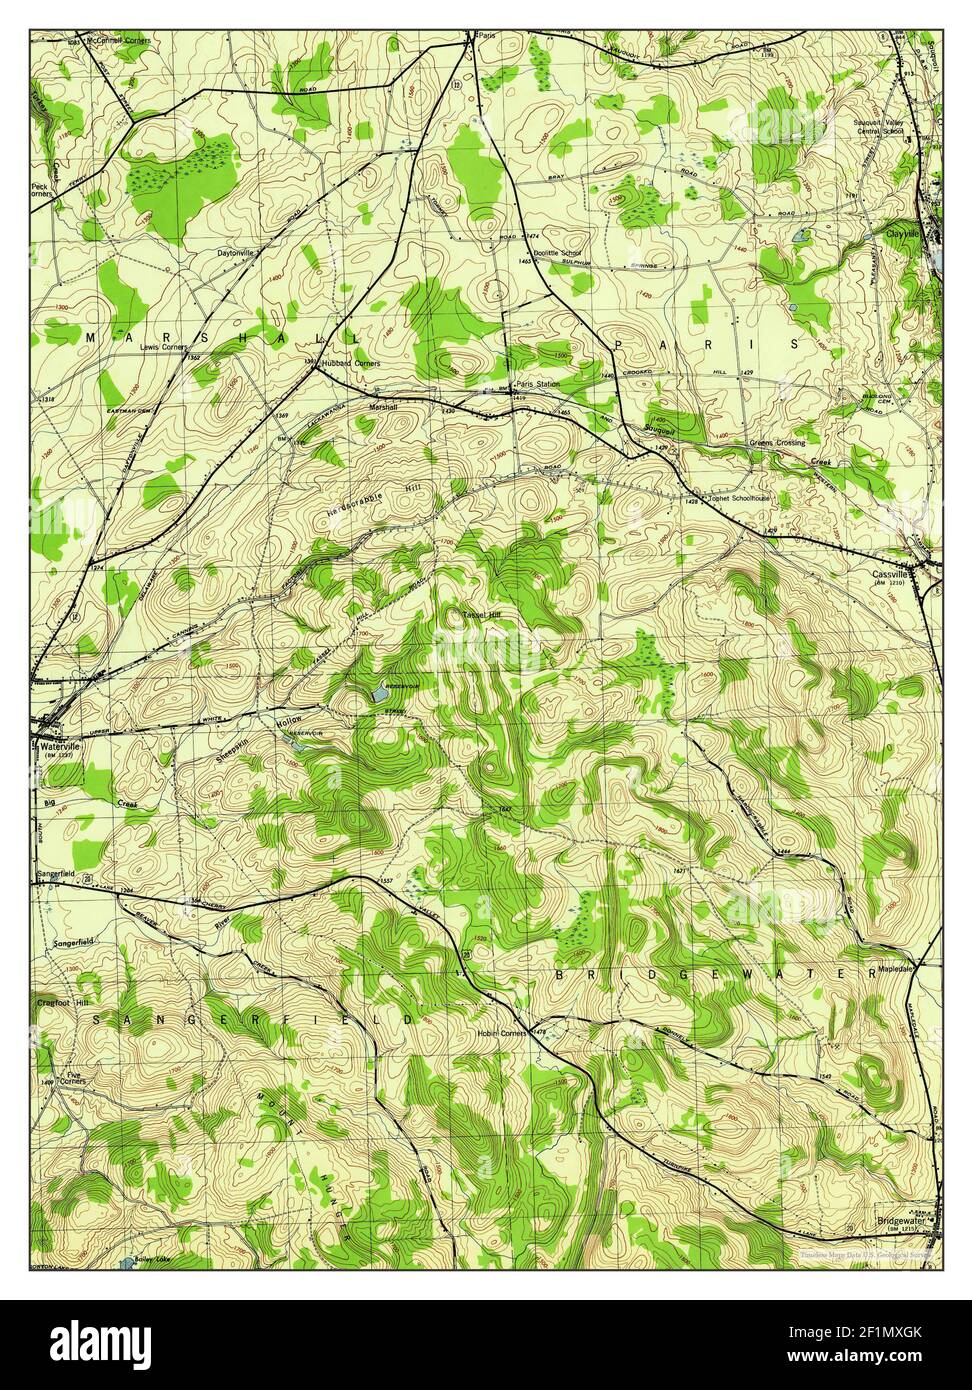 Cassville, New York, map 1945, 1:31680, United States of America by Timeless Maps, data U.S. Geological Survey Stock Photo